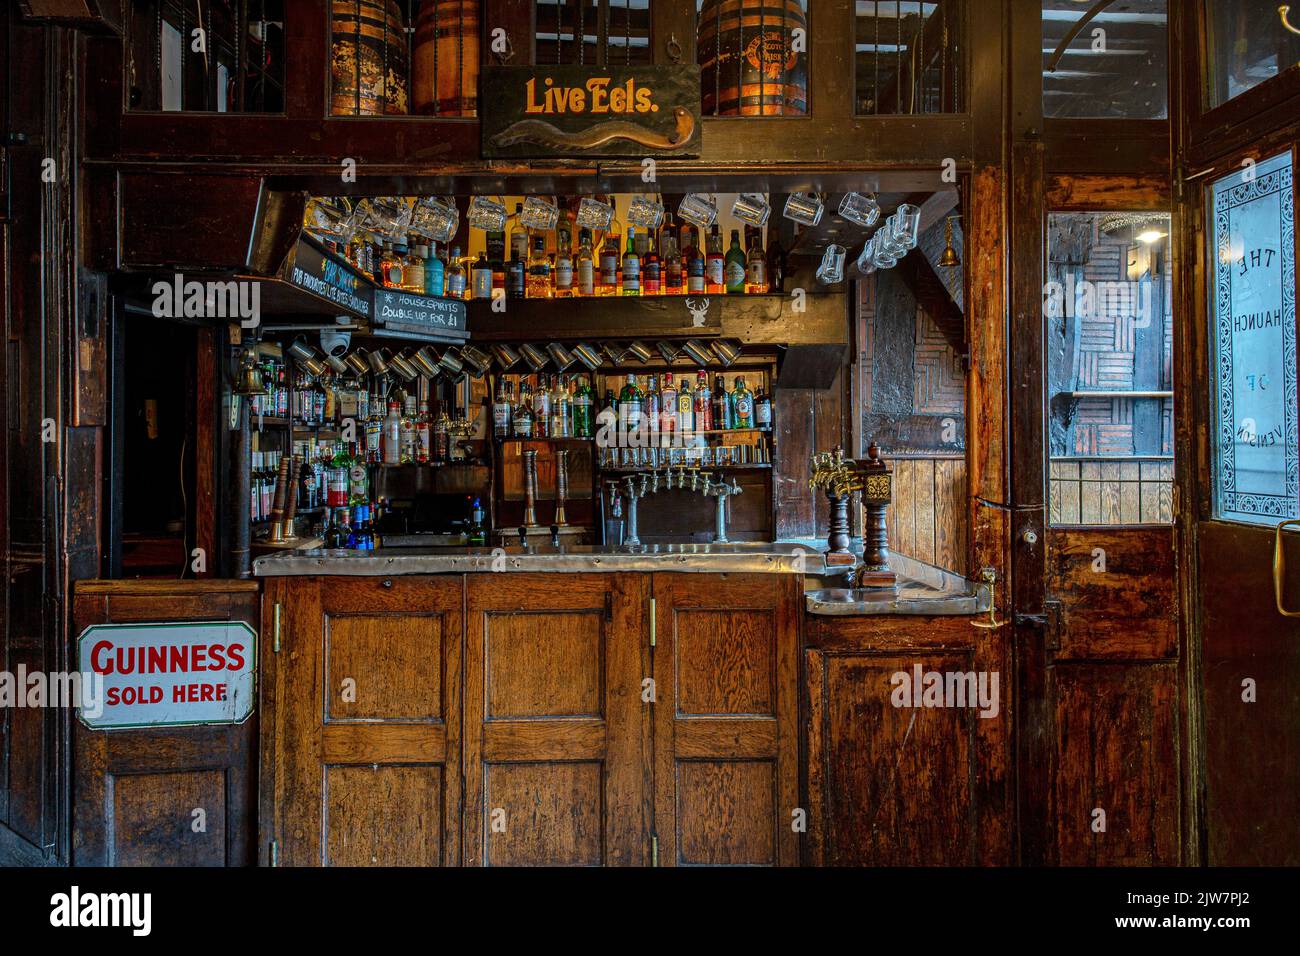 Traditional pub interior of The Haunch of Venison public house, in Salisbury, Wiltshire, England, UK Stock Photo